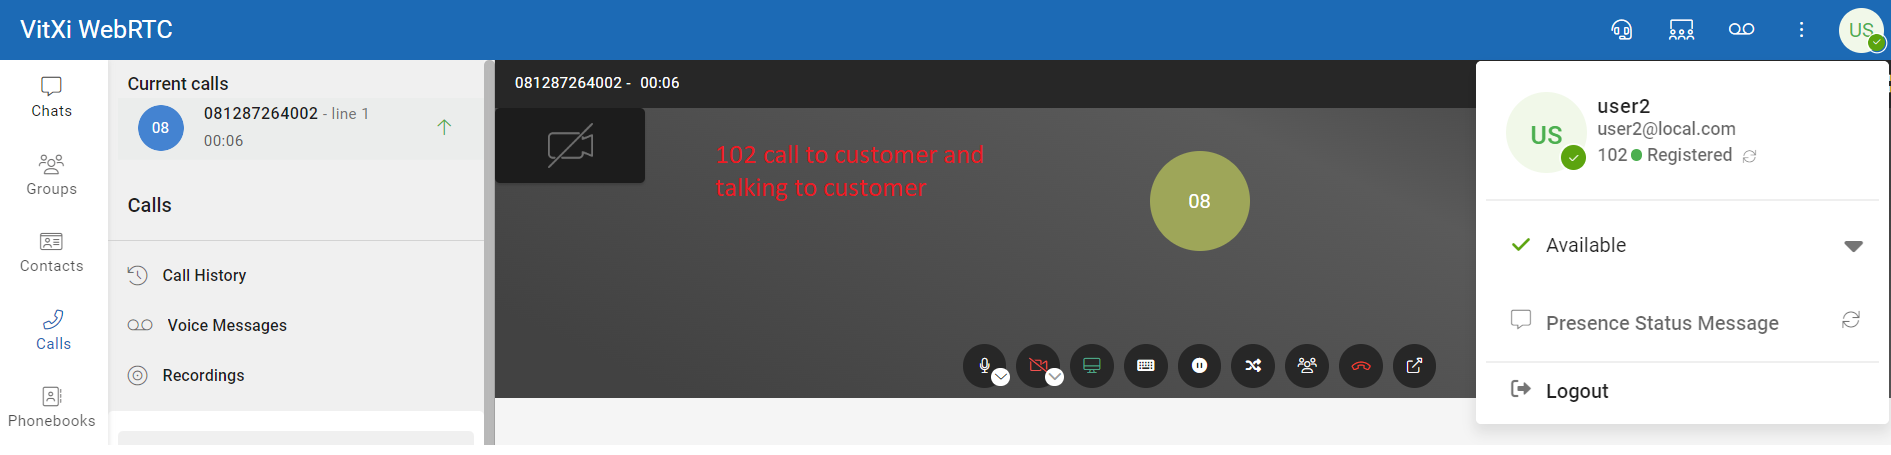 user2_call_to_customer_and_talking